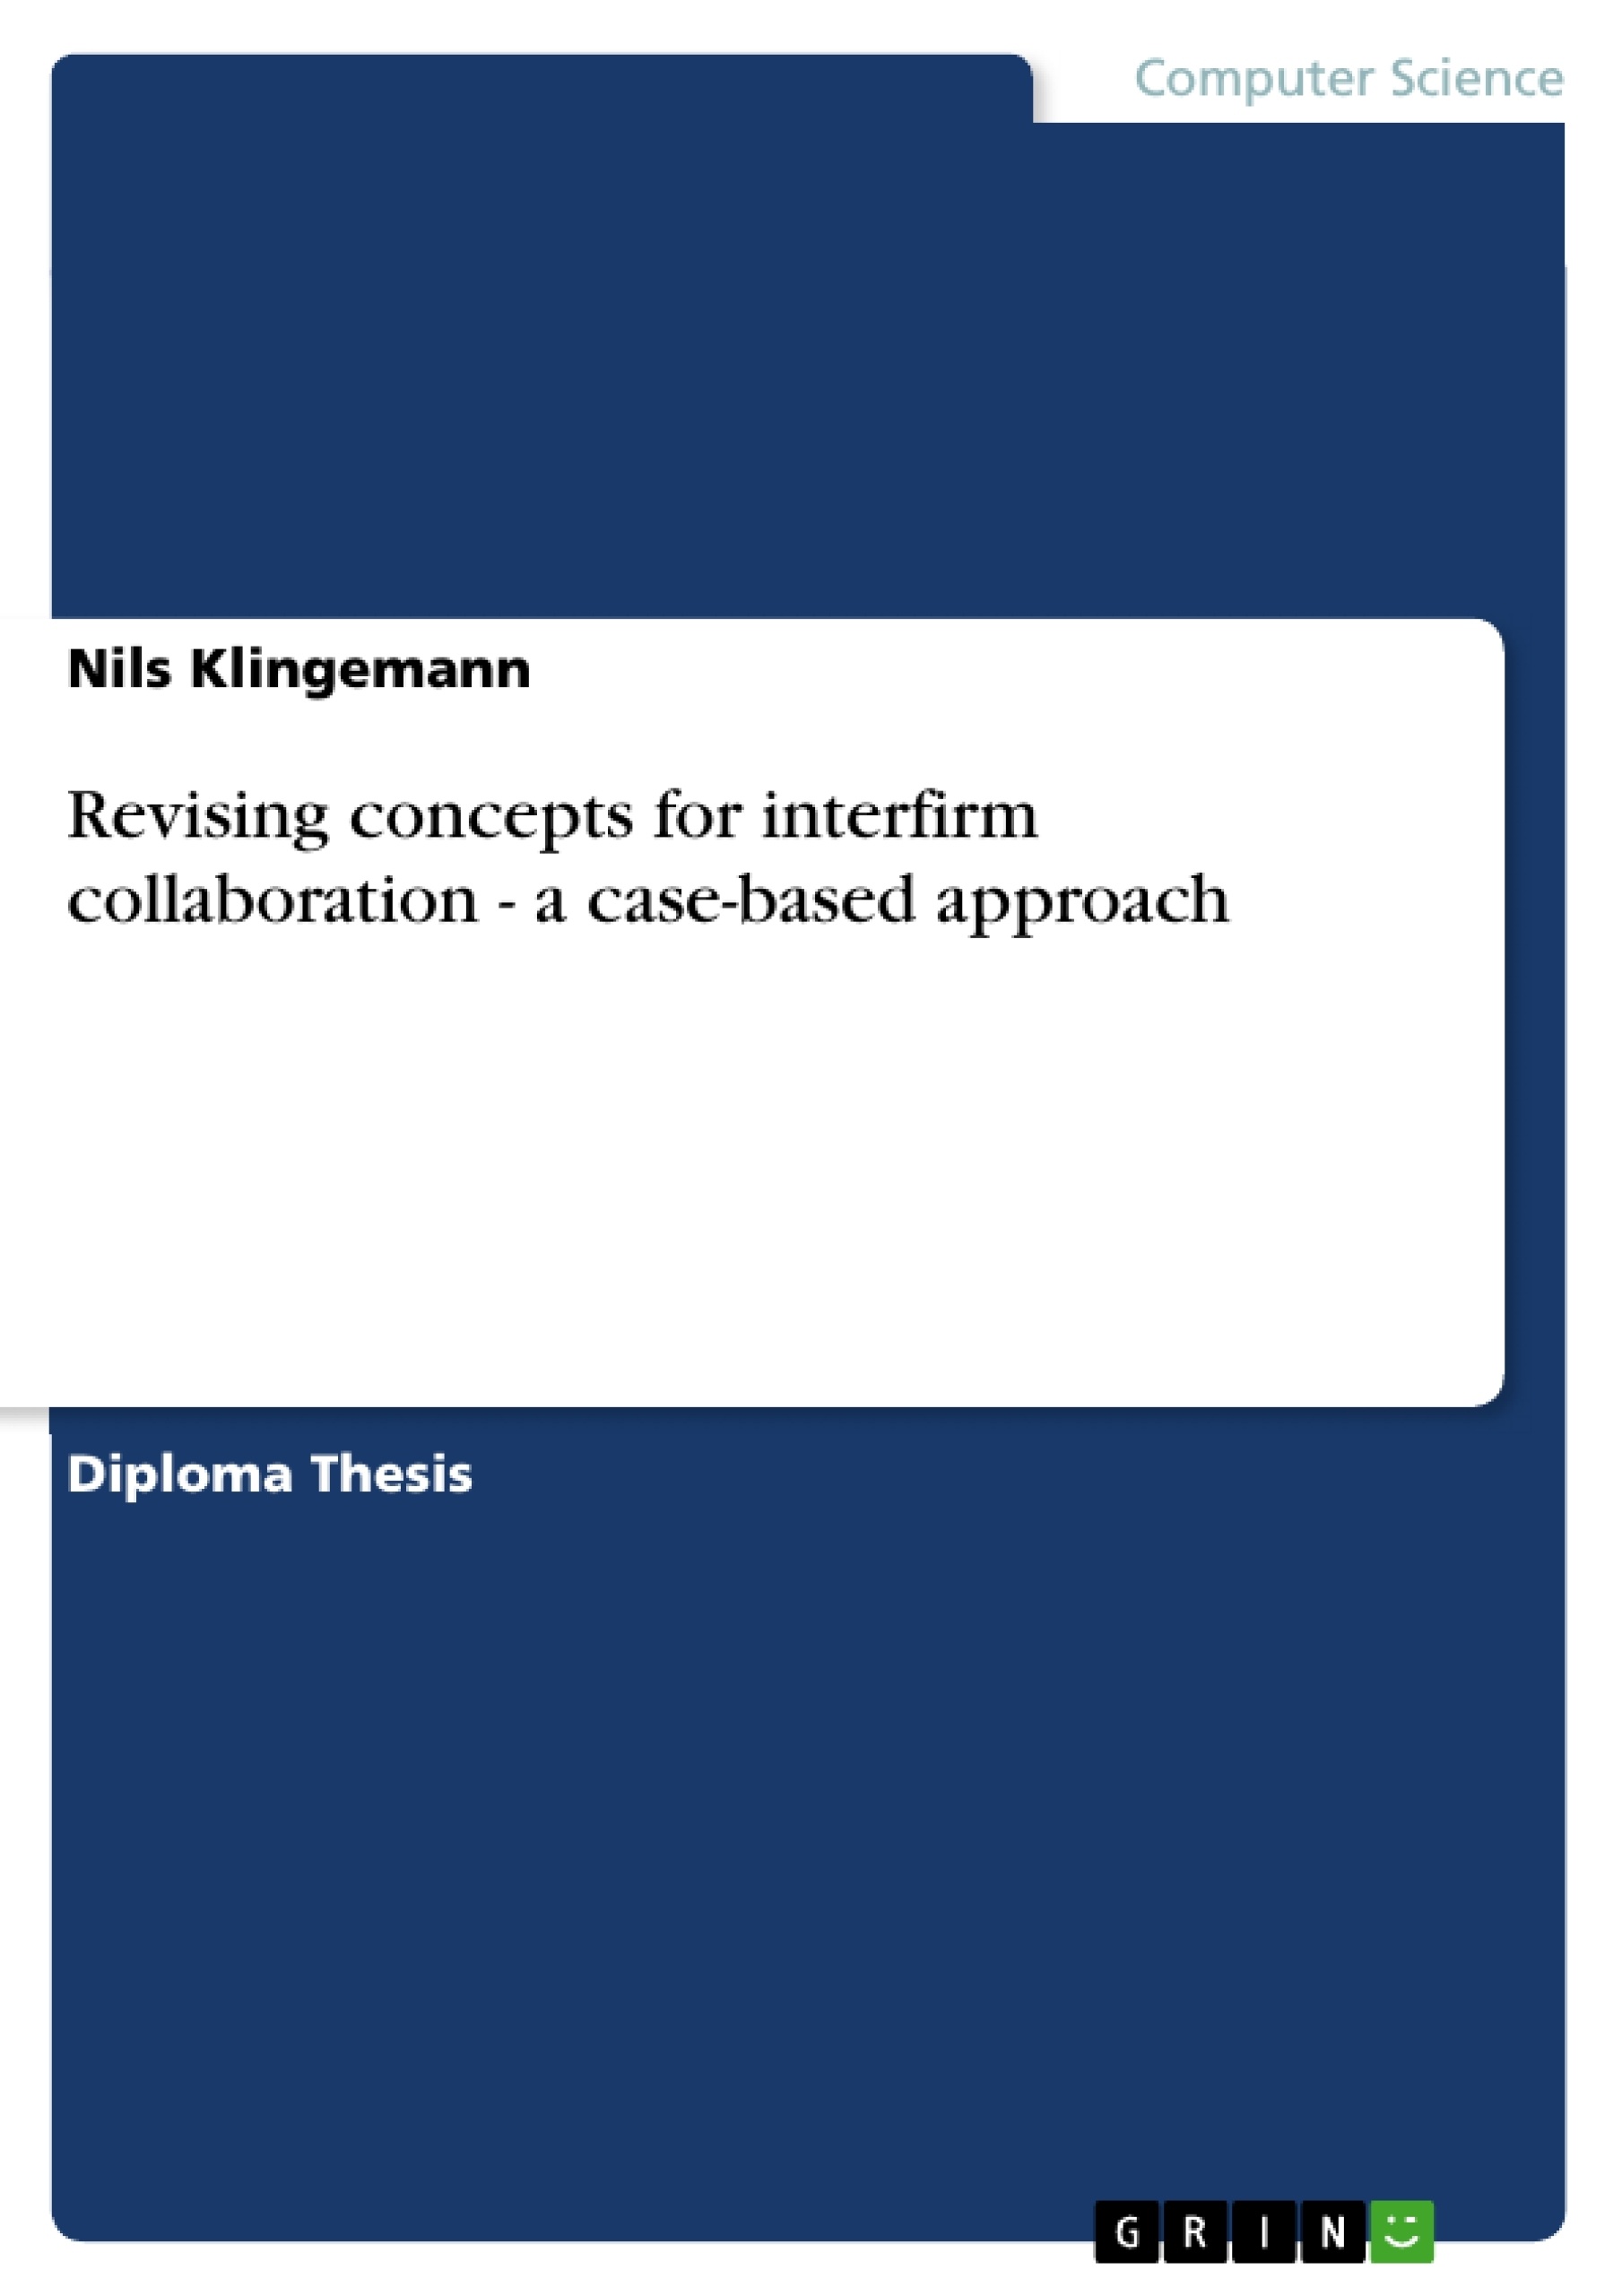 Titre: Revising concepts for interfirm collaboration - a case-based approach